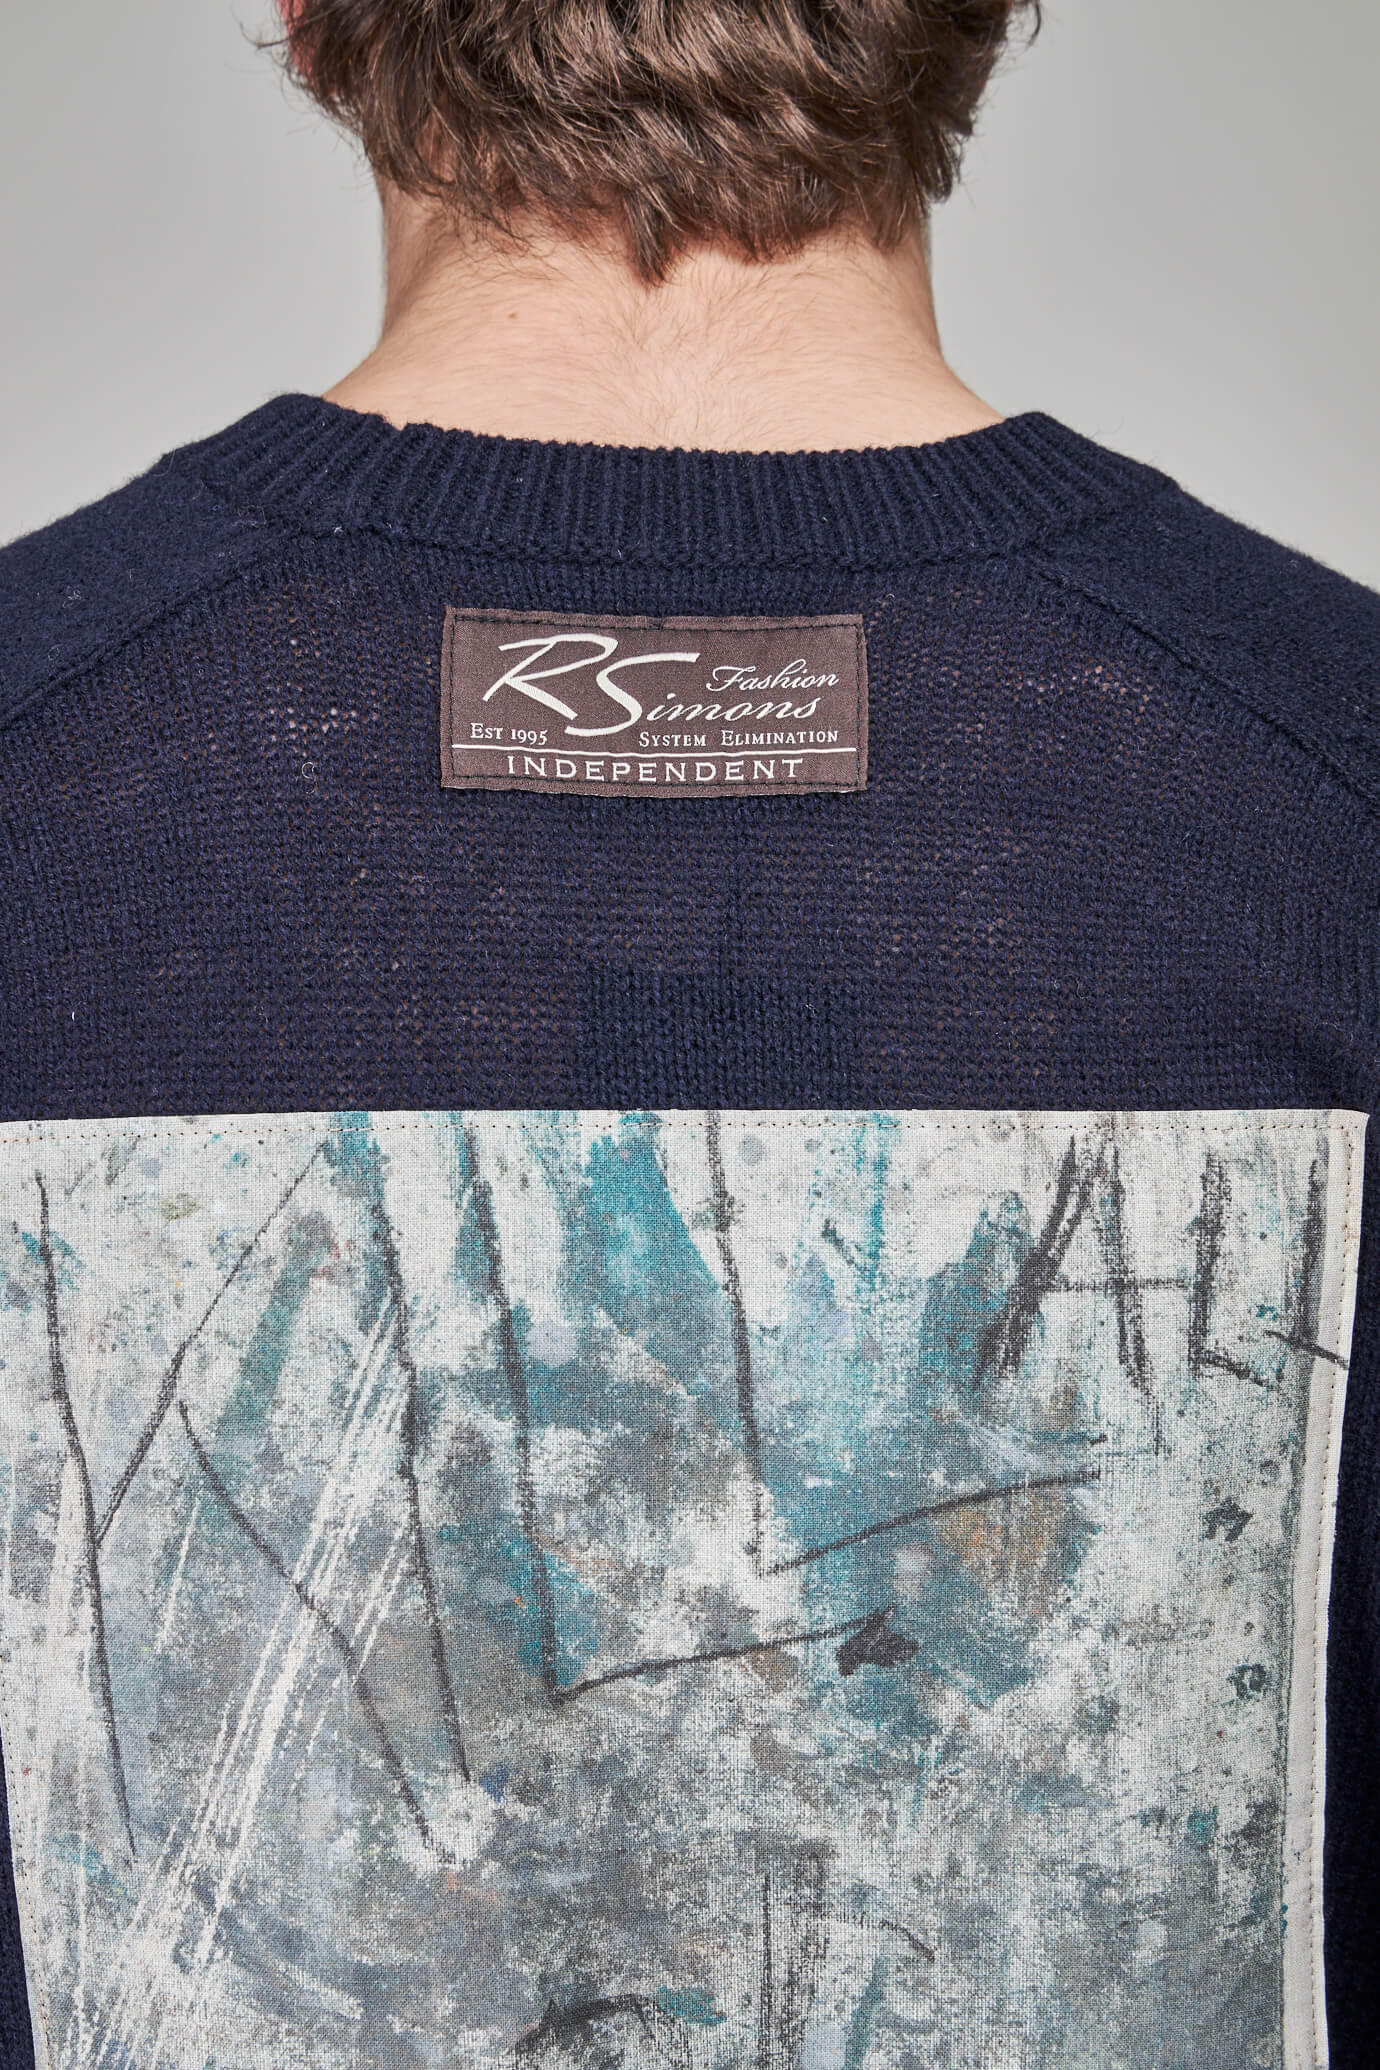 Light Roundneck Hammer Sweater with Patches, dark navy